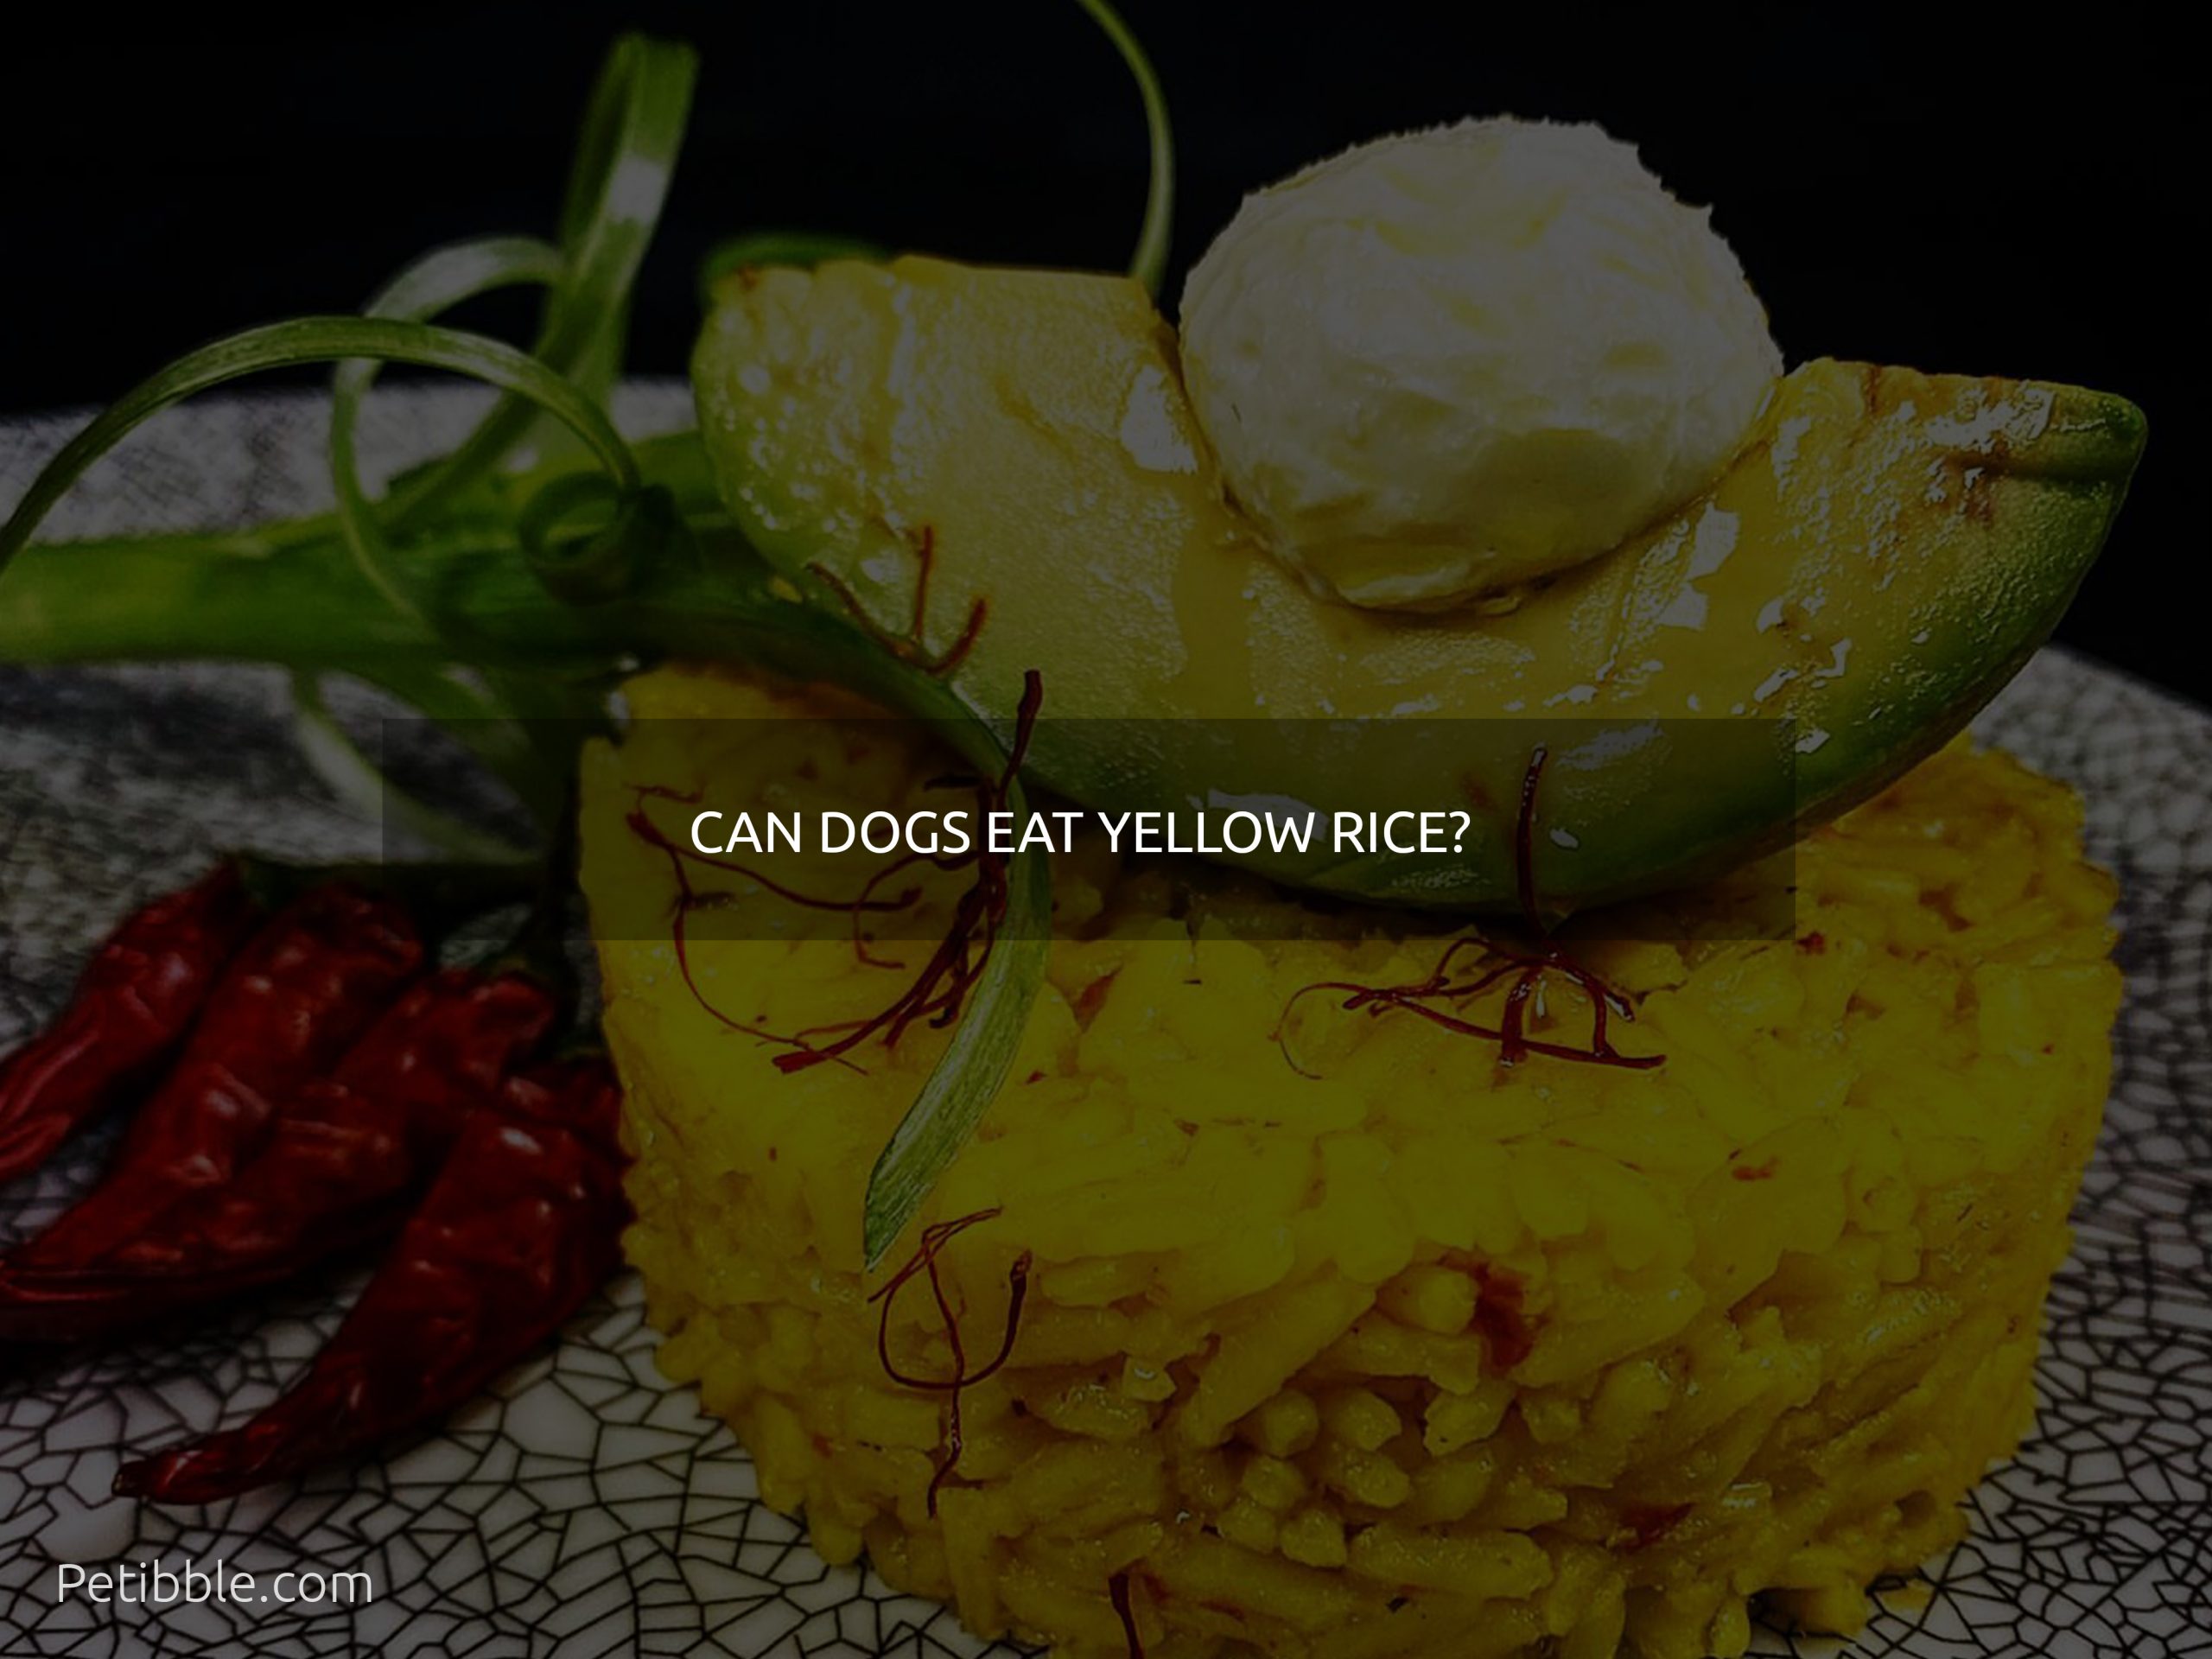 Can dogs eat yellow rice?